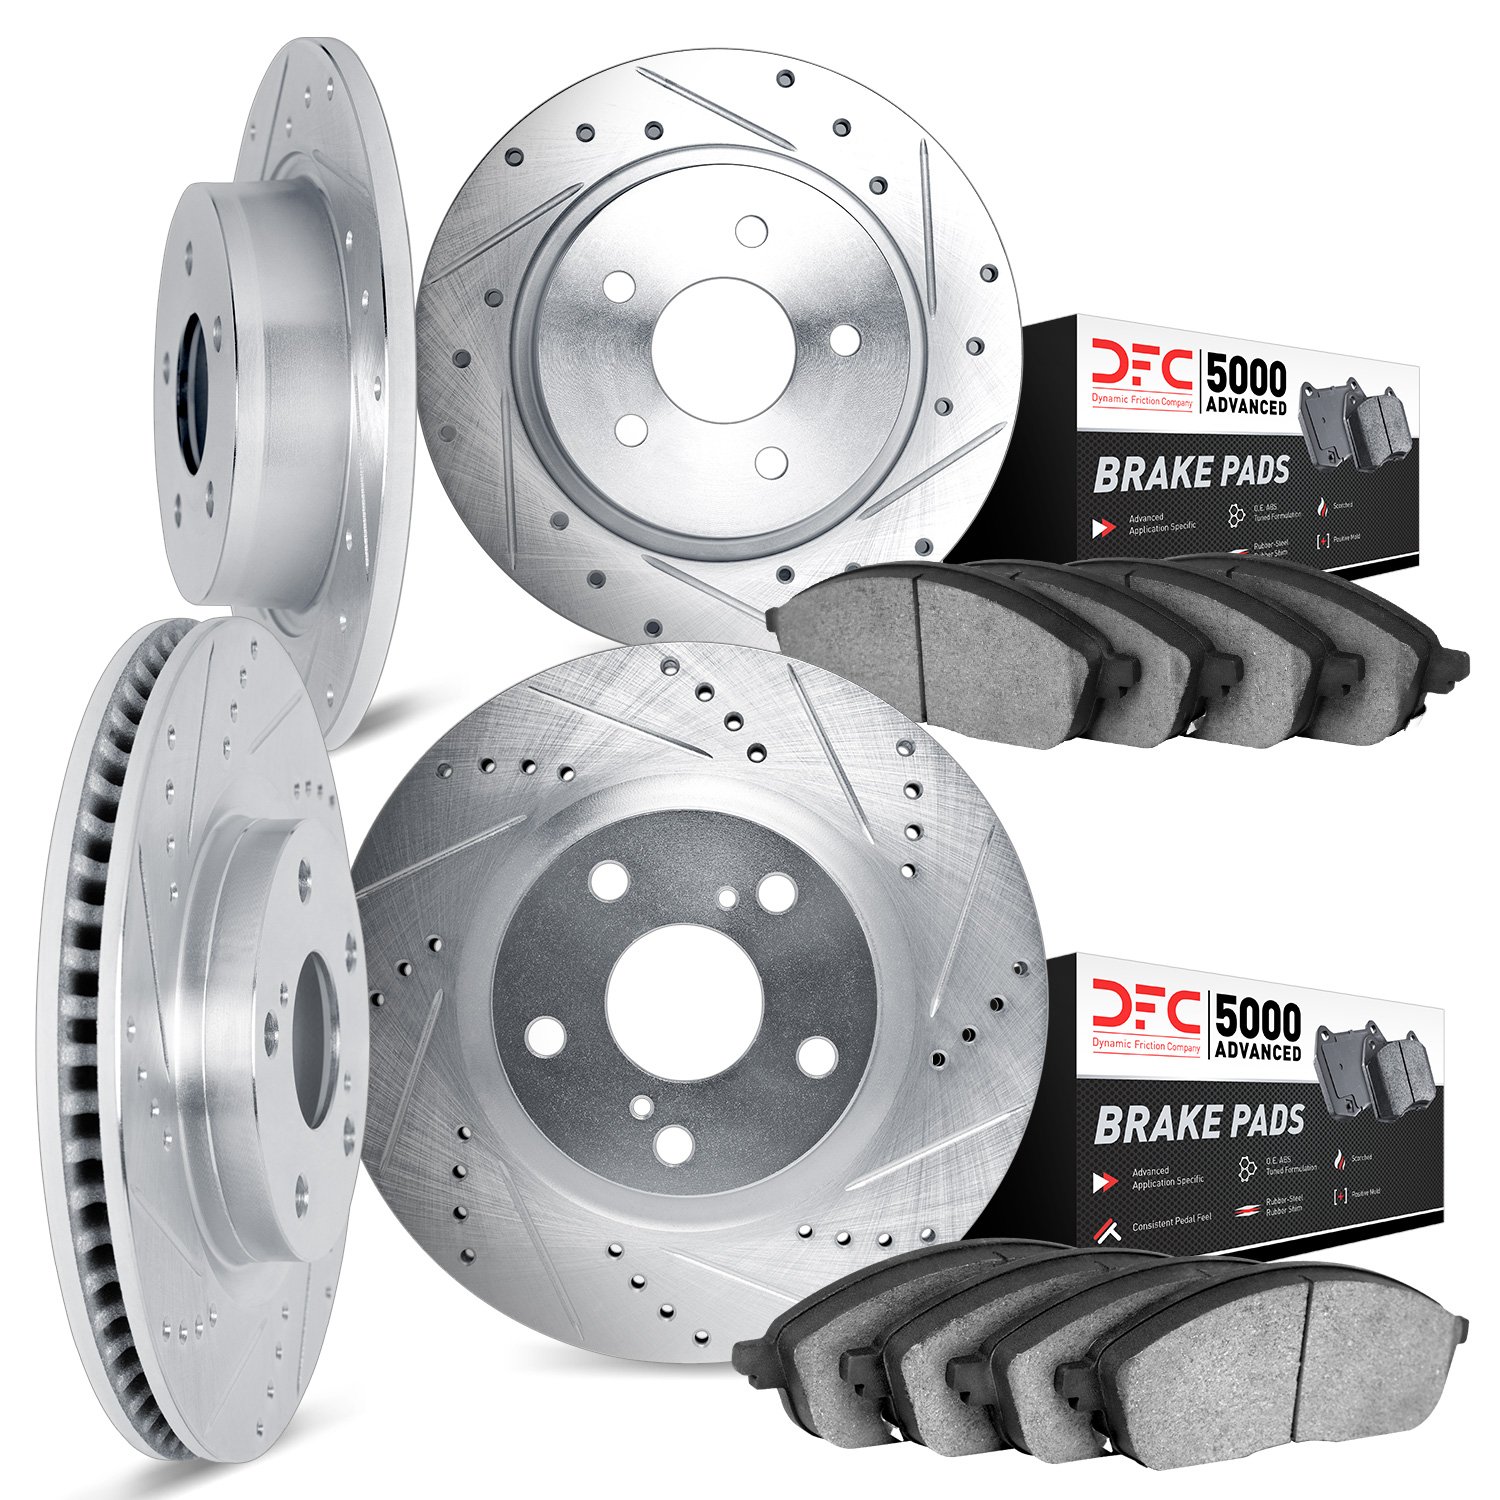 7504-13001 Drilled/Slotted Brake Rotors w/5000 Advanced Brake Pads Kit [Silver], 1996-1996 Subaru, Position: Front and Rear